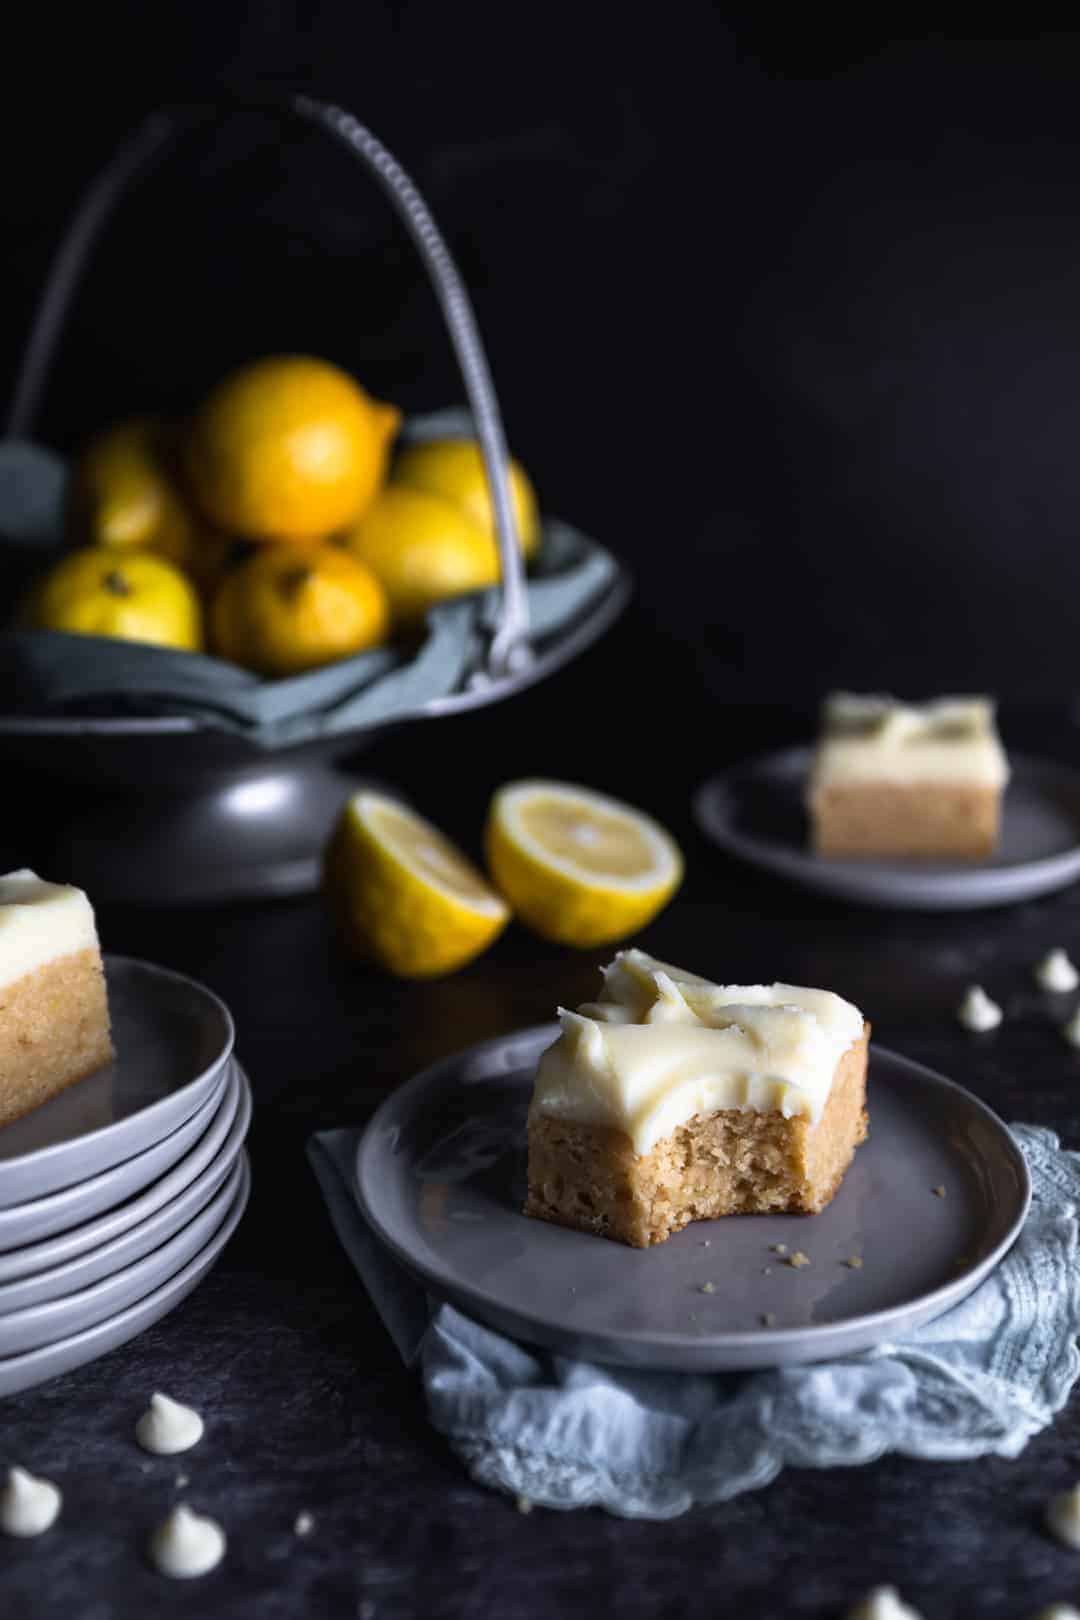 A lemon blondie with white chocolate ganache frosting on a small plate with one bite taken out. Two other blondies are on small plates nearby, white chocolate chips are scattered around and a big bowl of lemons are in the background